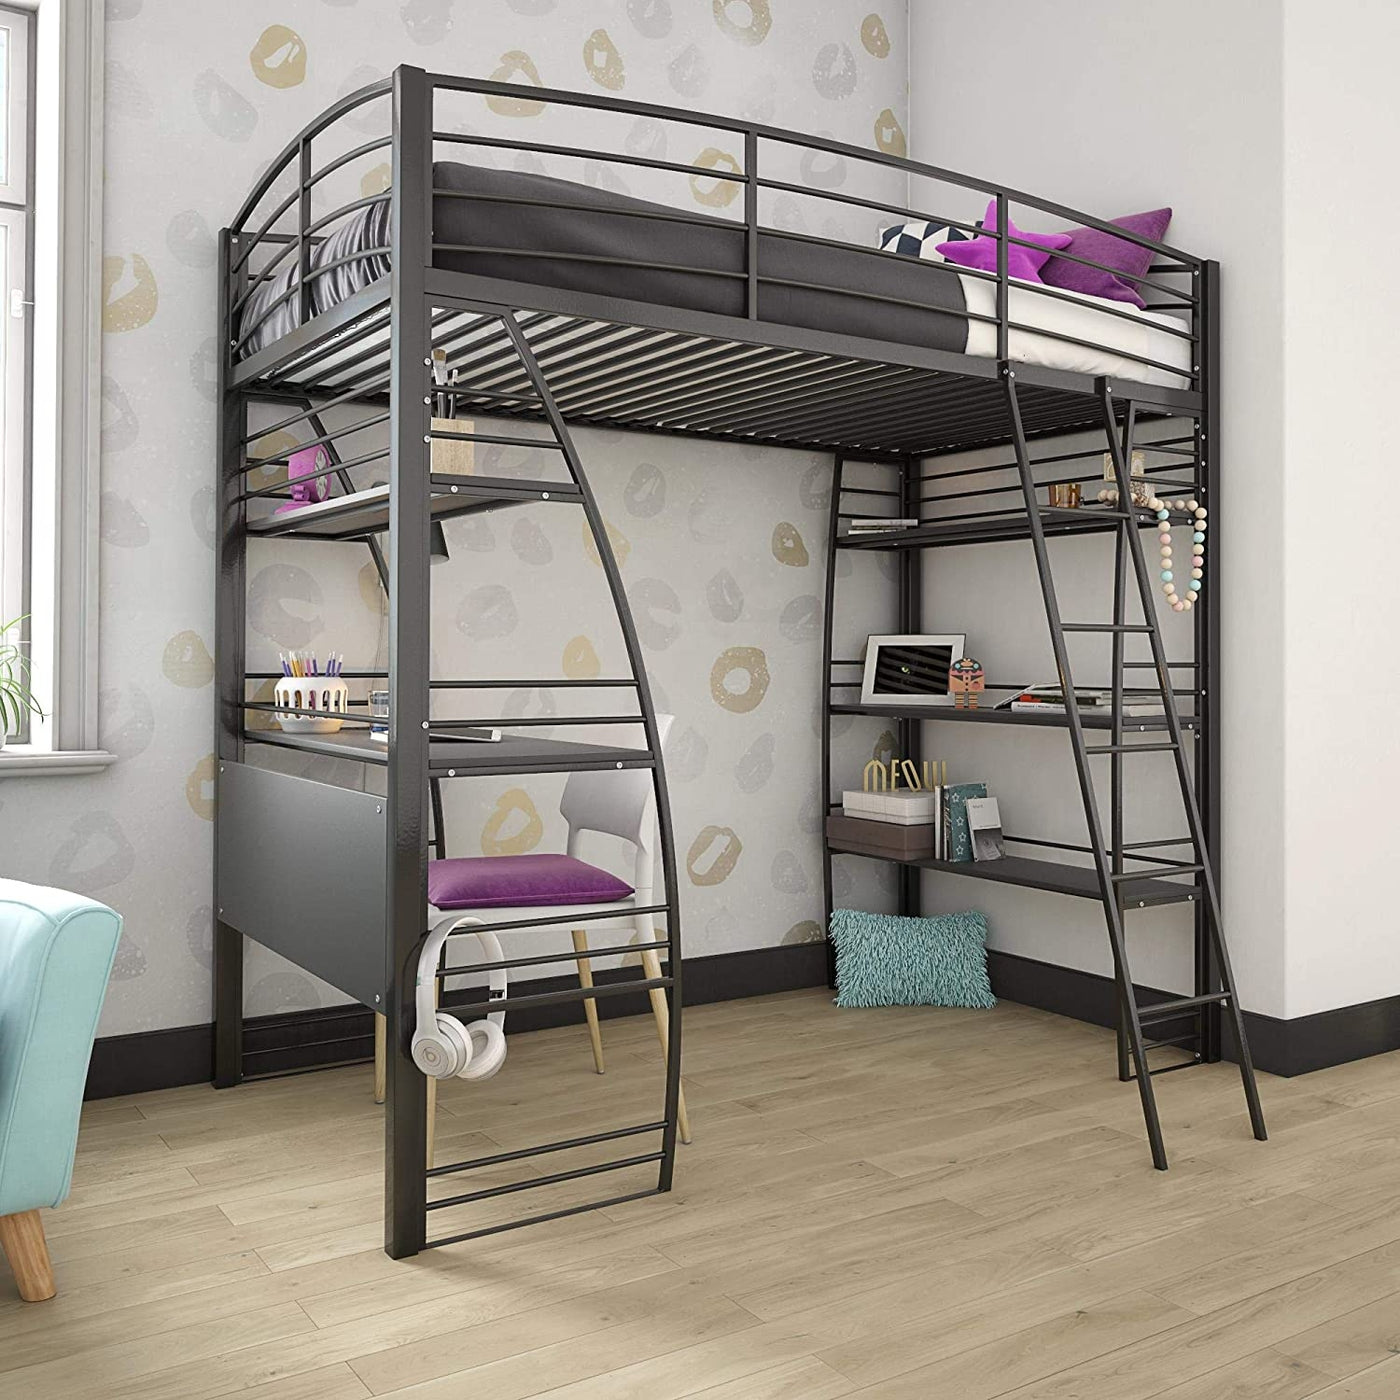 DHP Studio Loft Bunk Bed Over Desk and Bookcase with Metal Frame - Twin (Gray) - $235